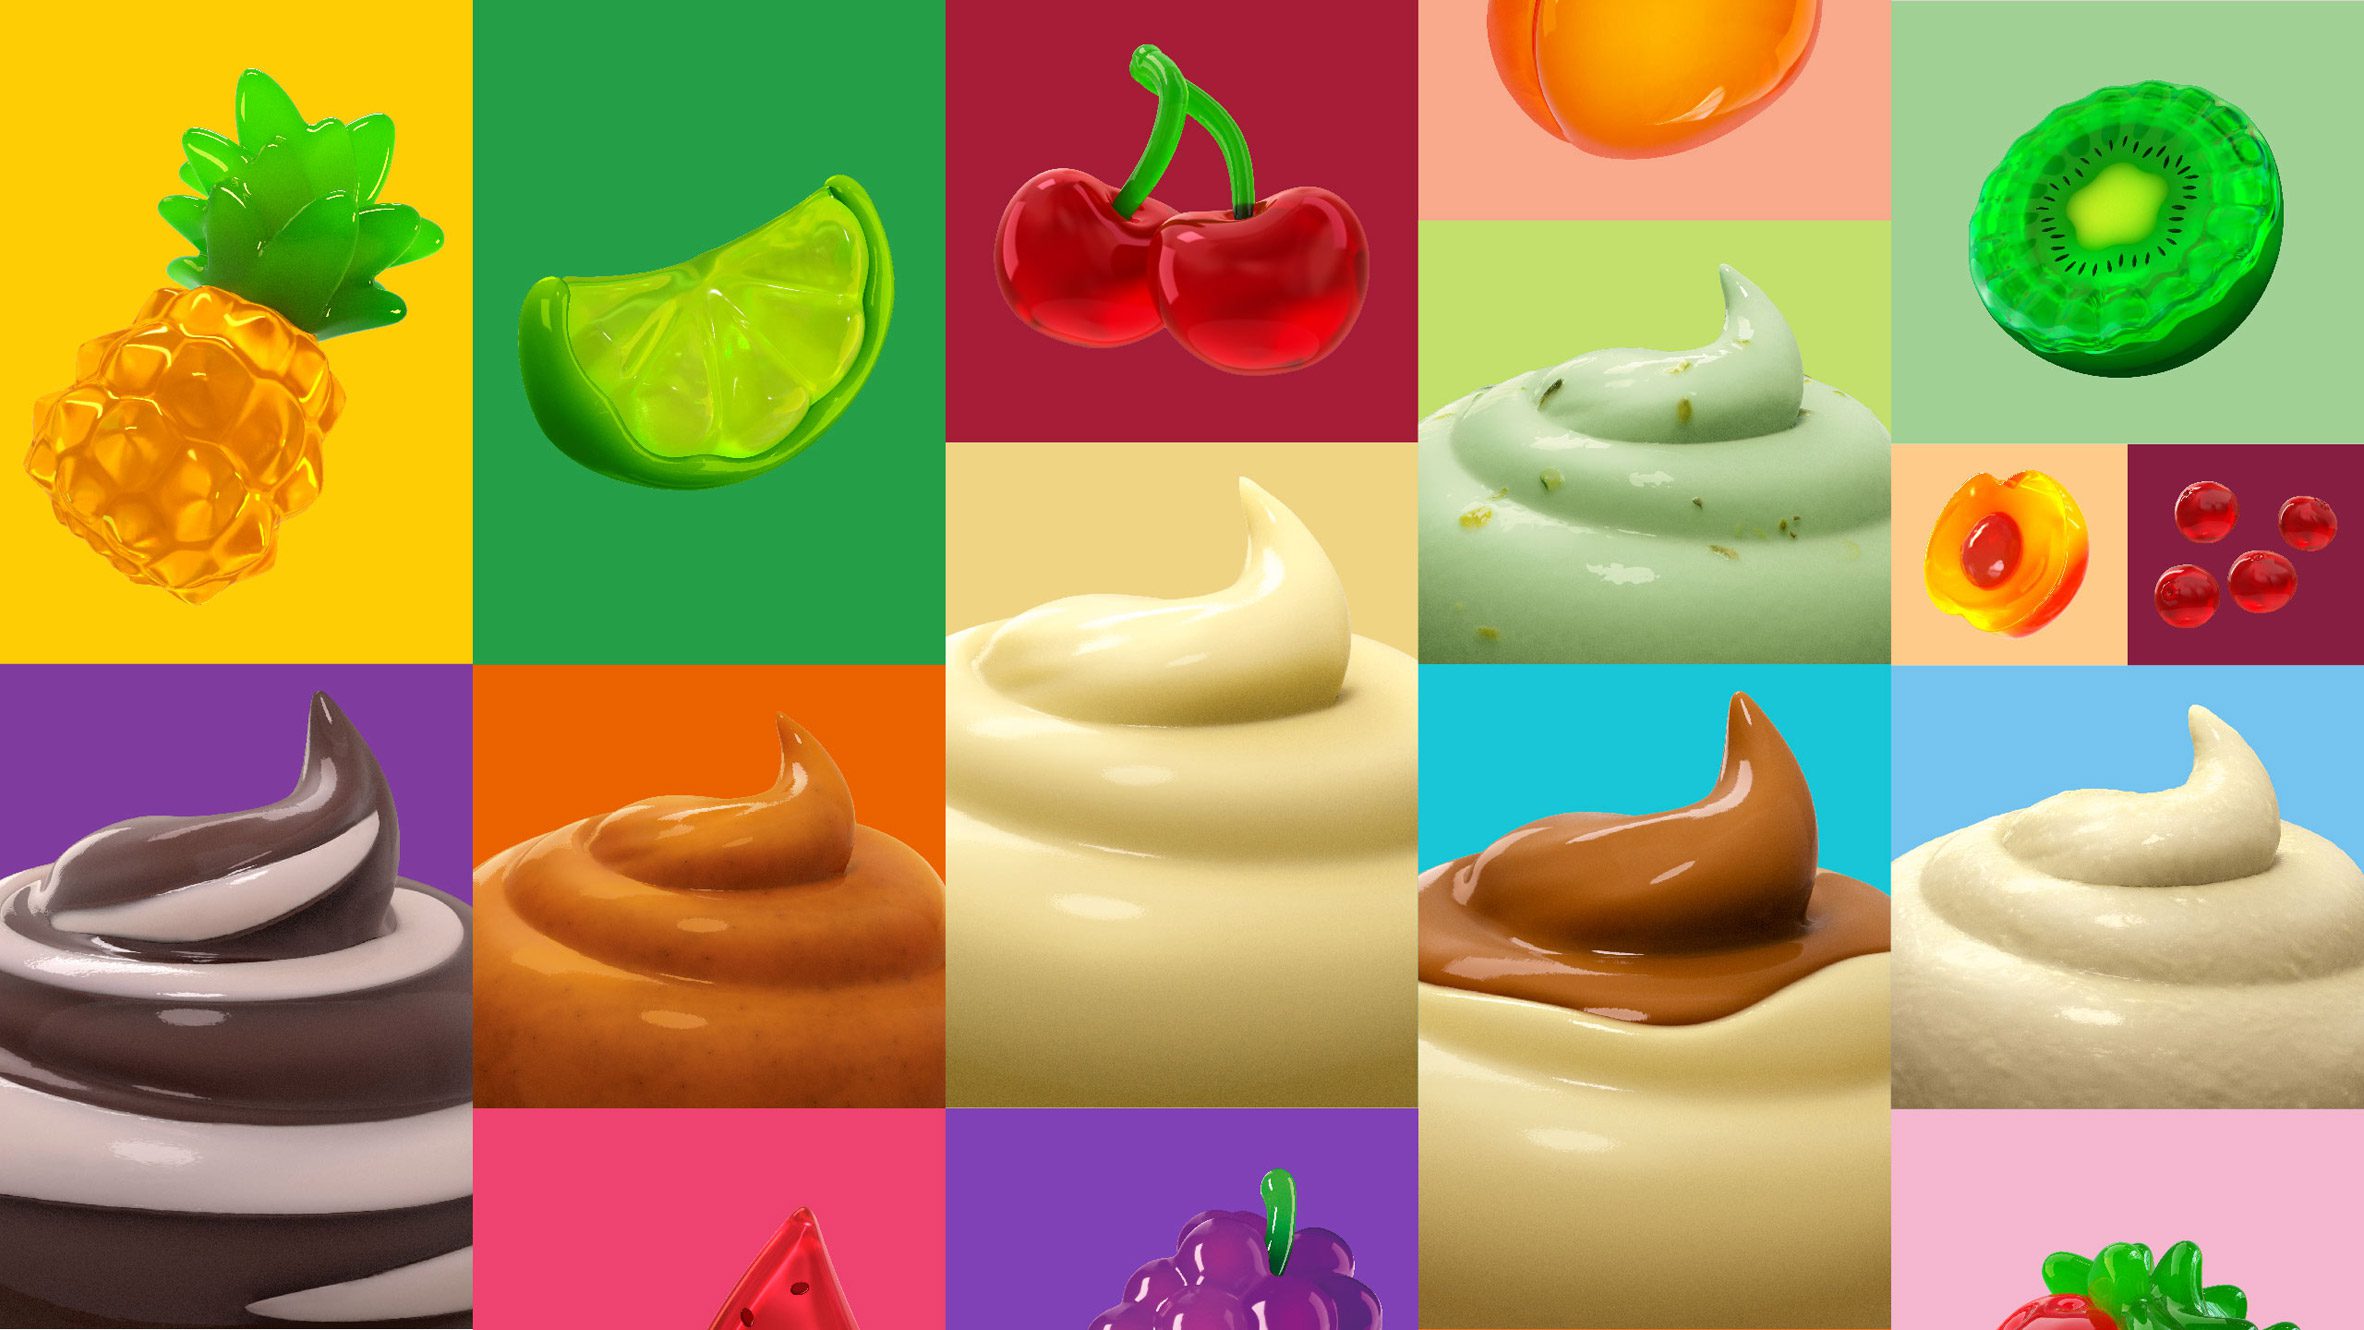 3D renders of jelly fruits and pudding swirls